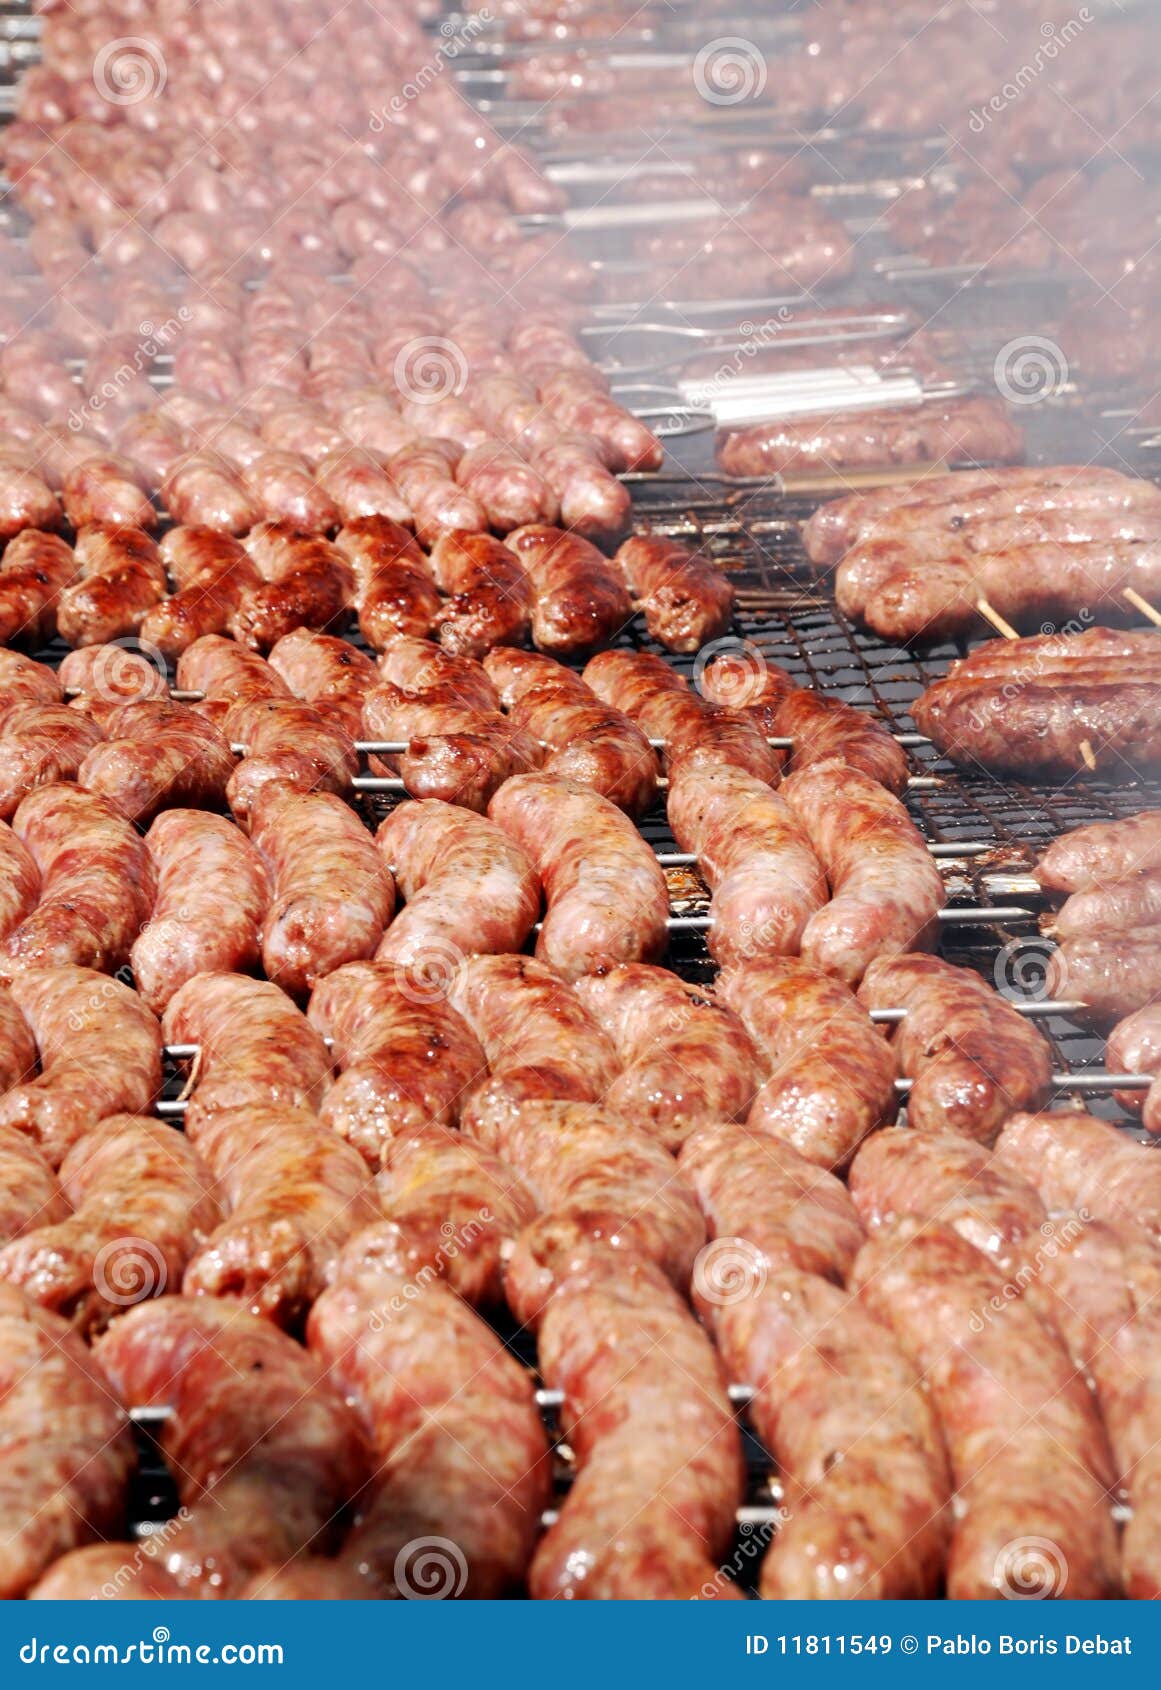 argentinean barbecue sausages